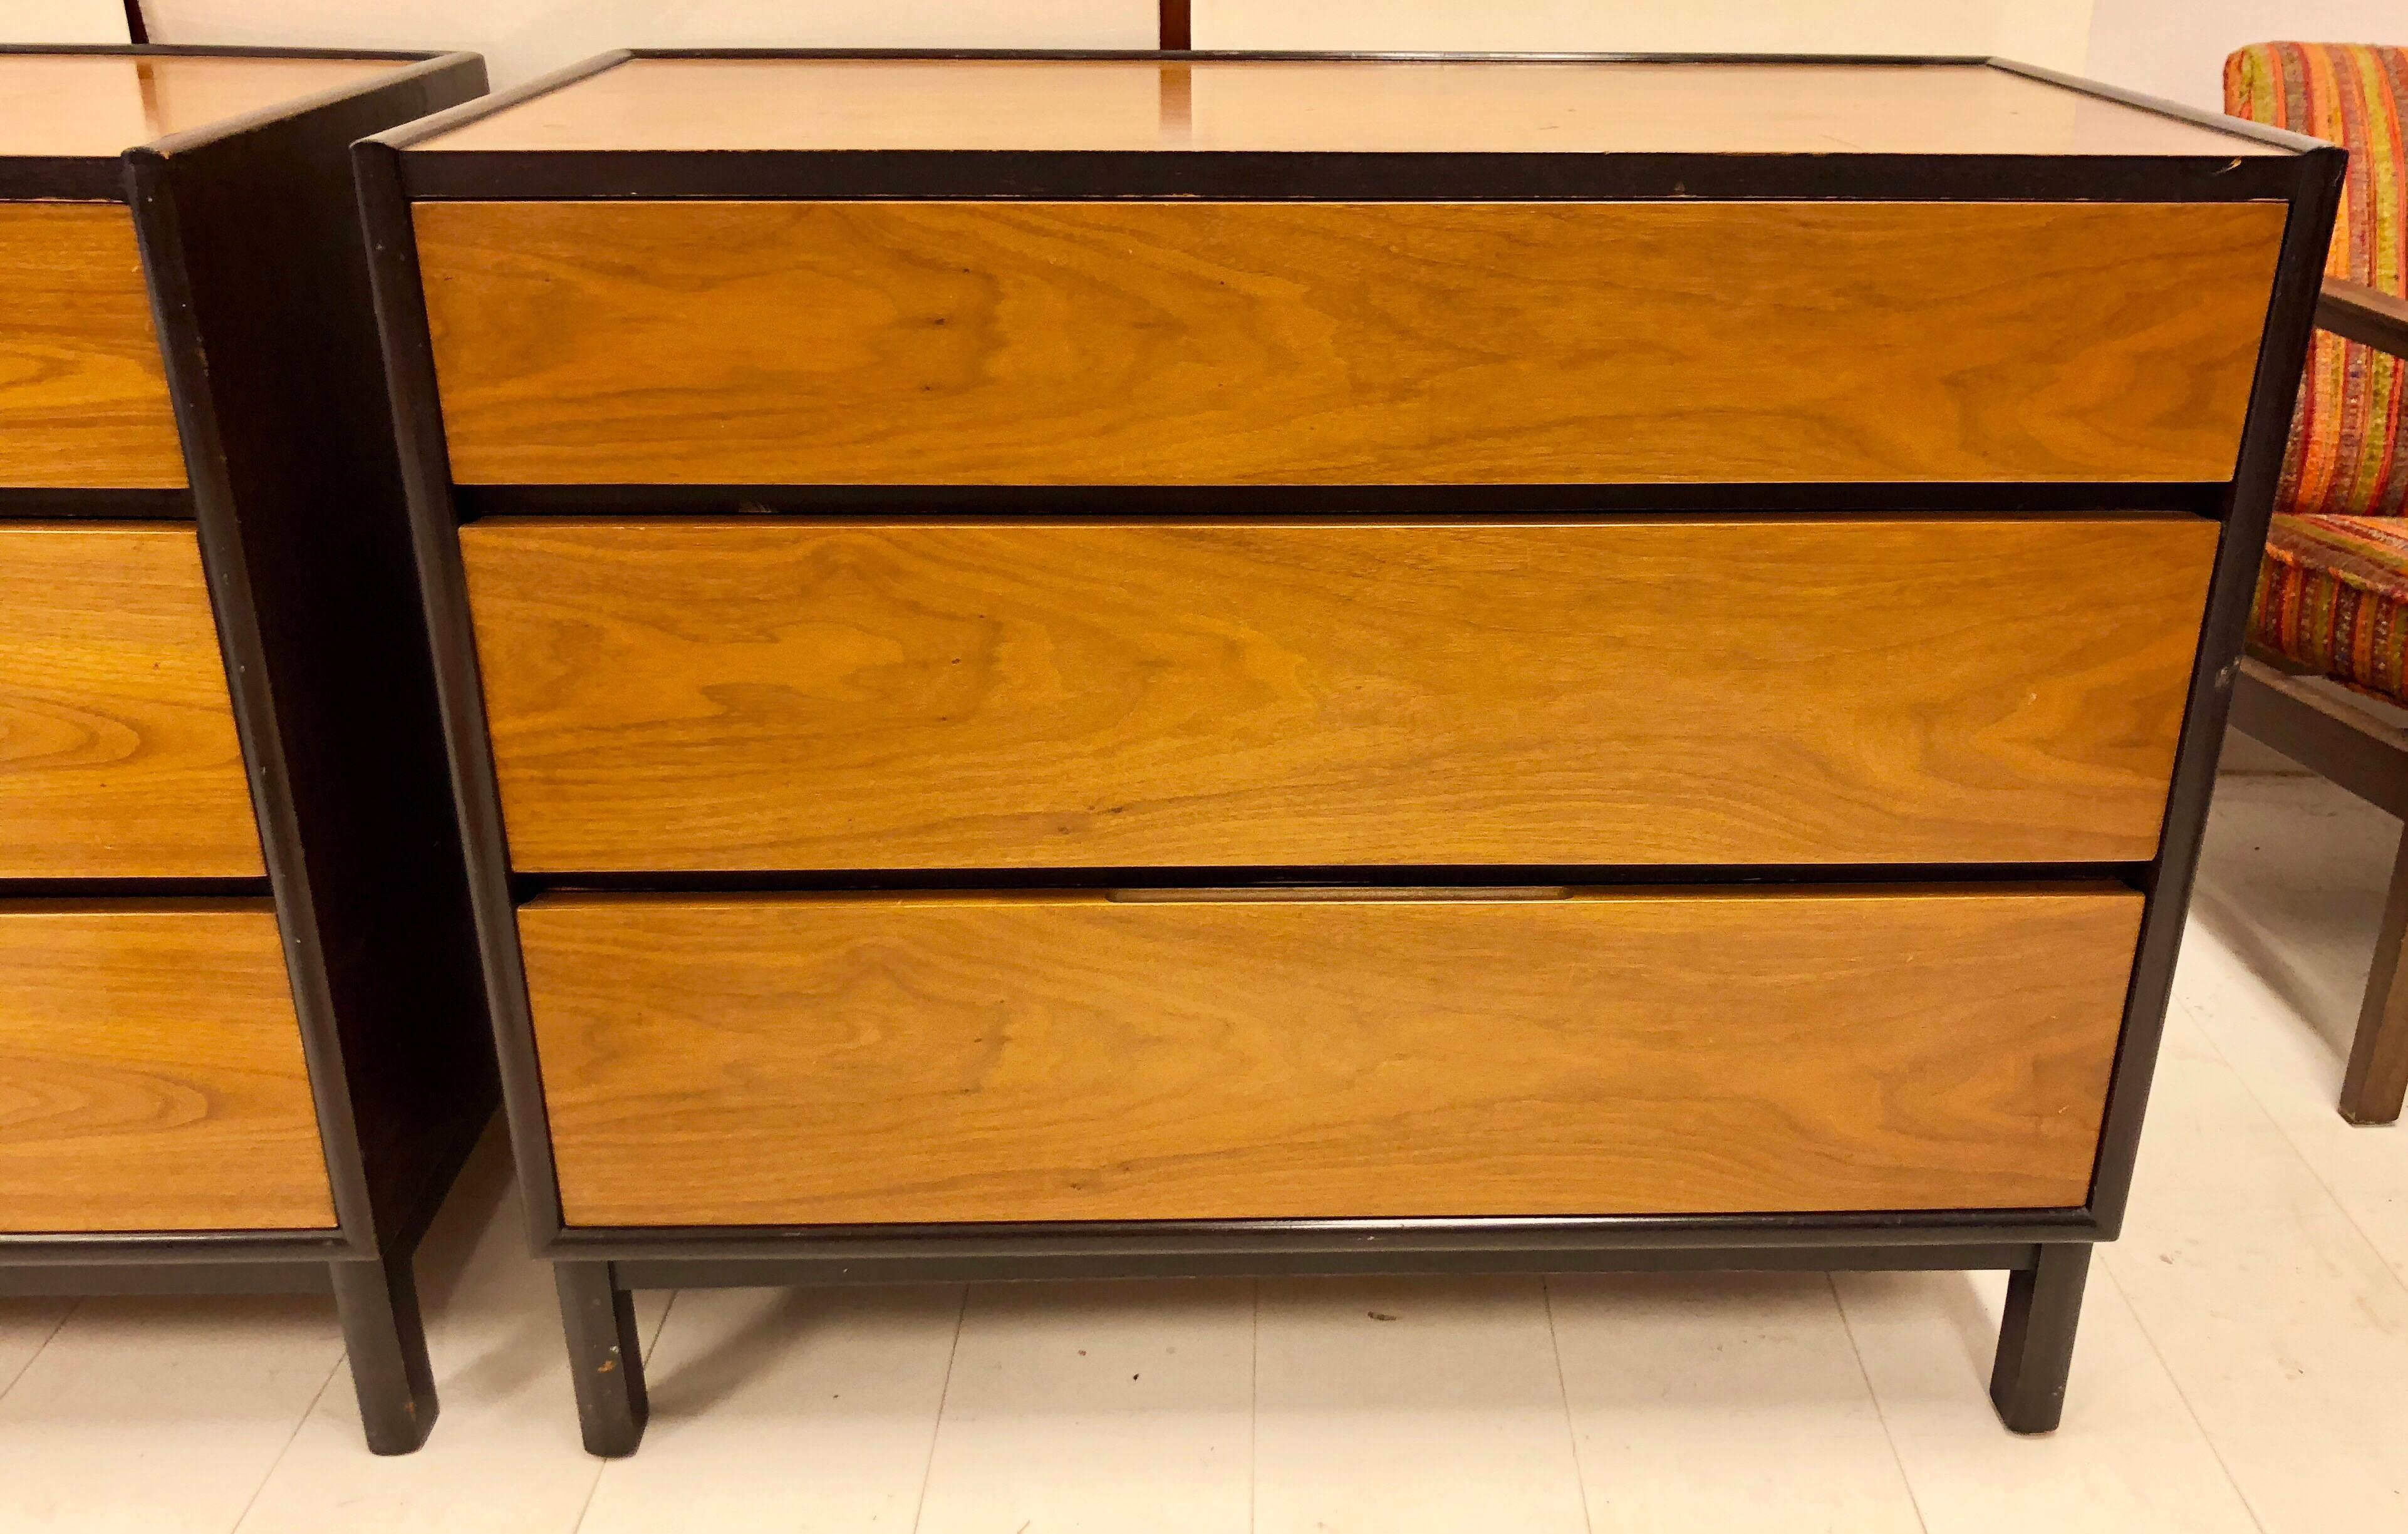 Handsome masculine chests of drawers in walnut with dark mahogany trim. Each chest retains its Dunbar gold metal tag.